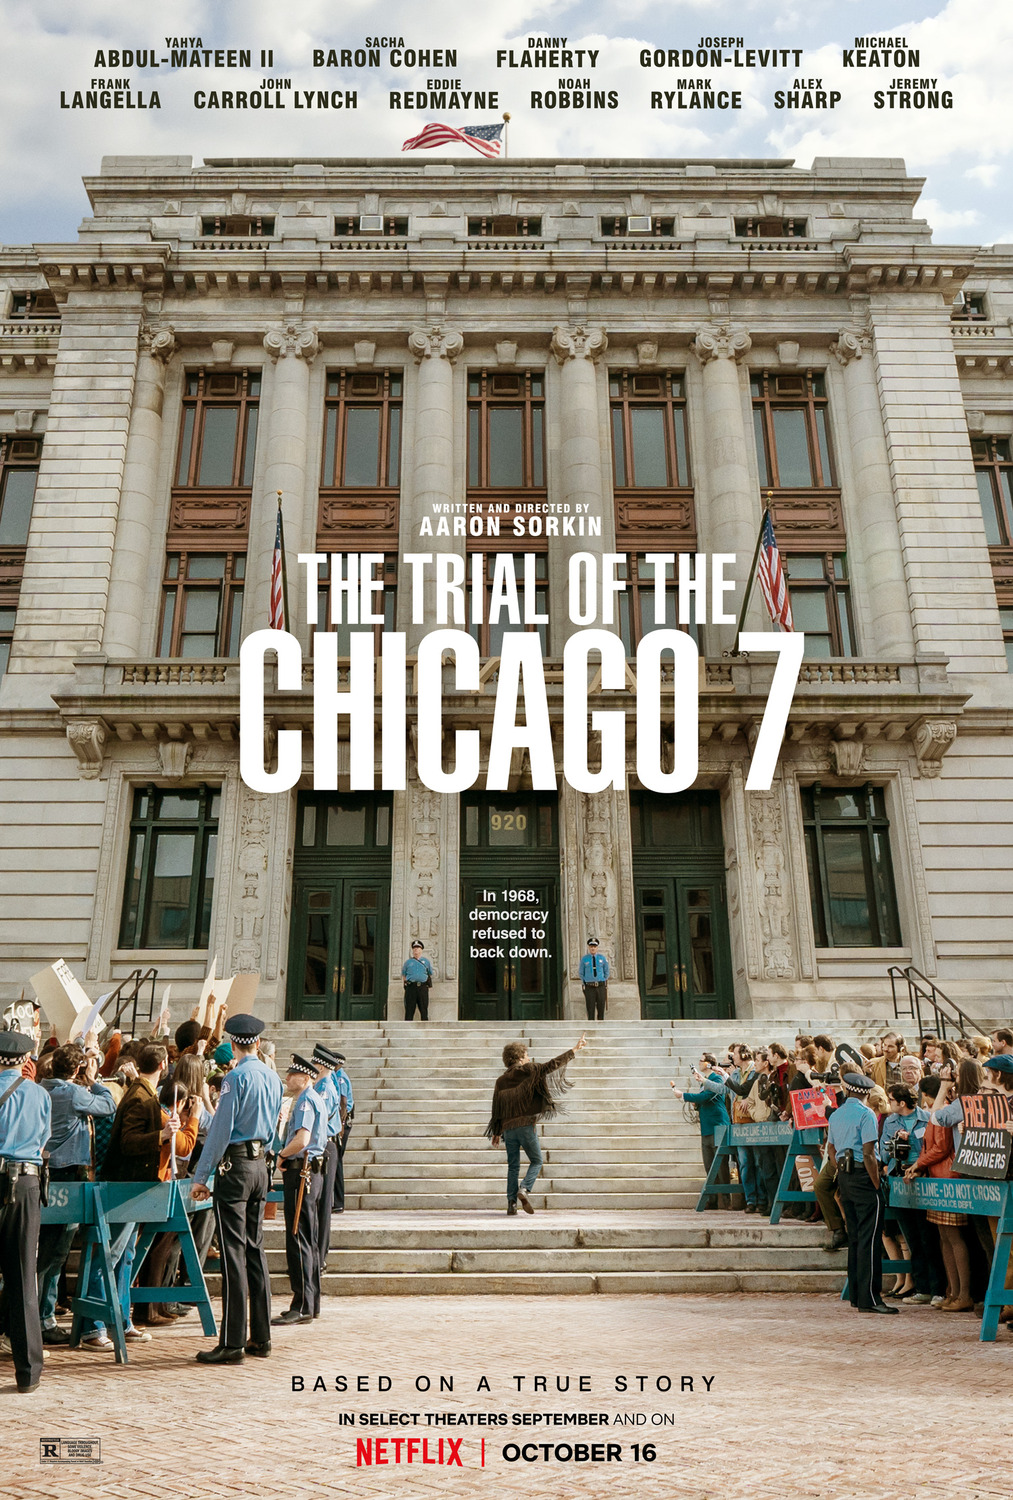 Extra Large Movie Poster Image for The Trial of the Chicago 7 